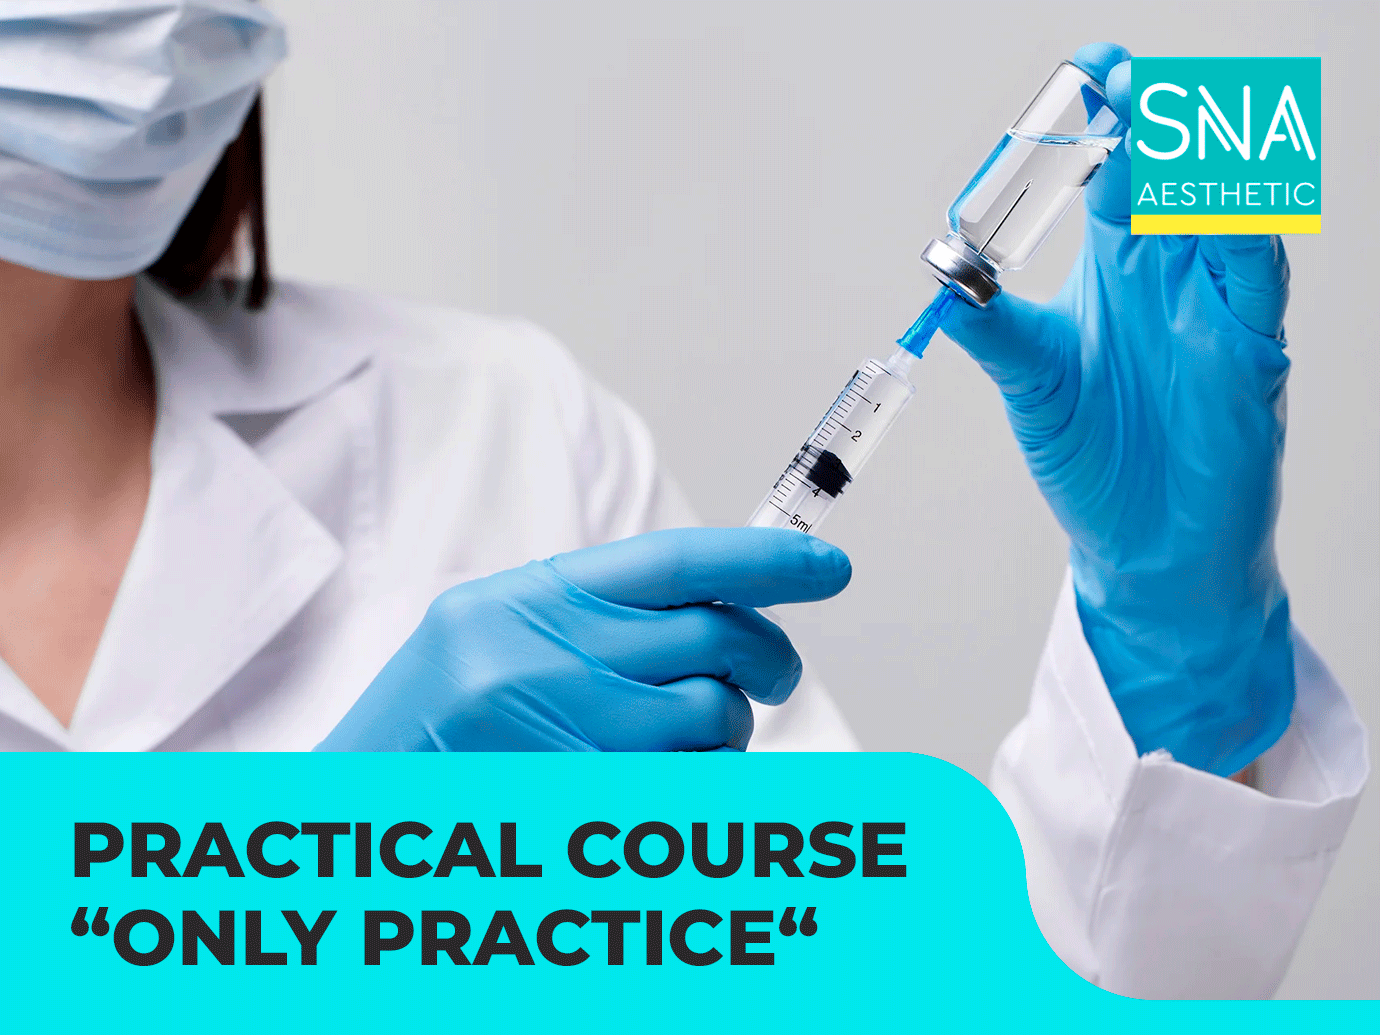 Practical course “Only practice“